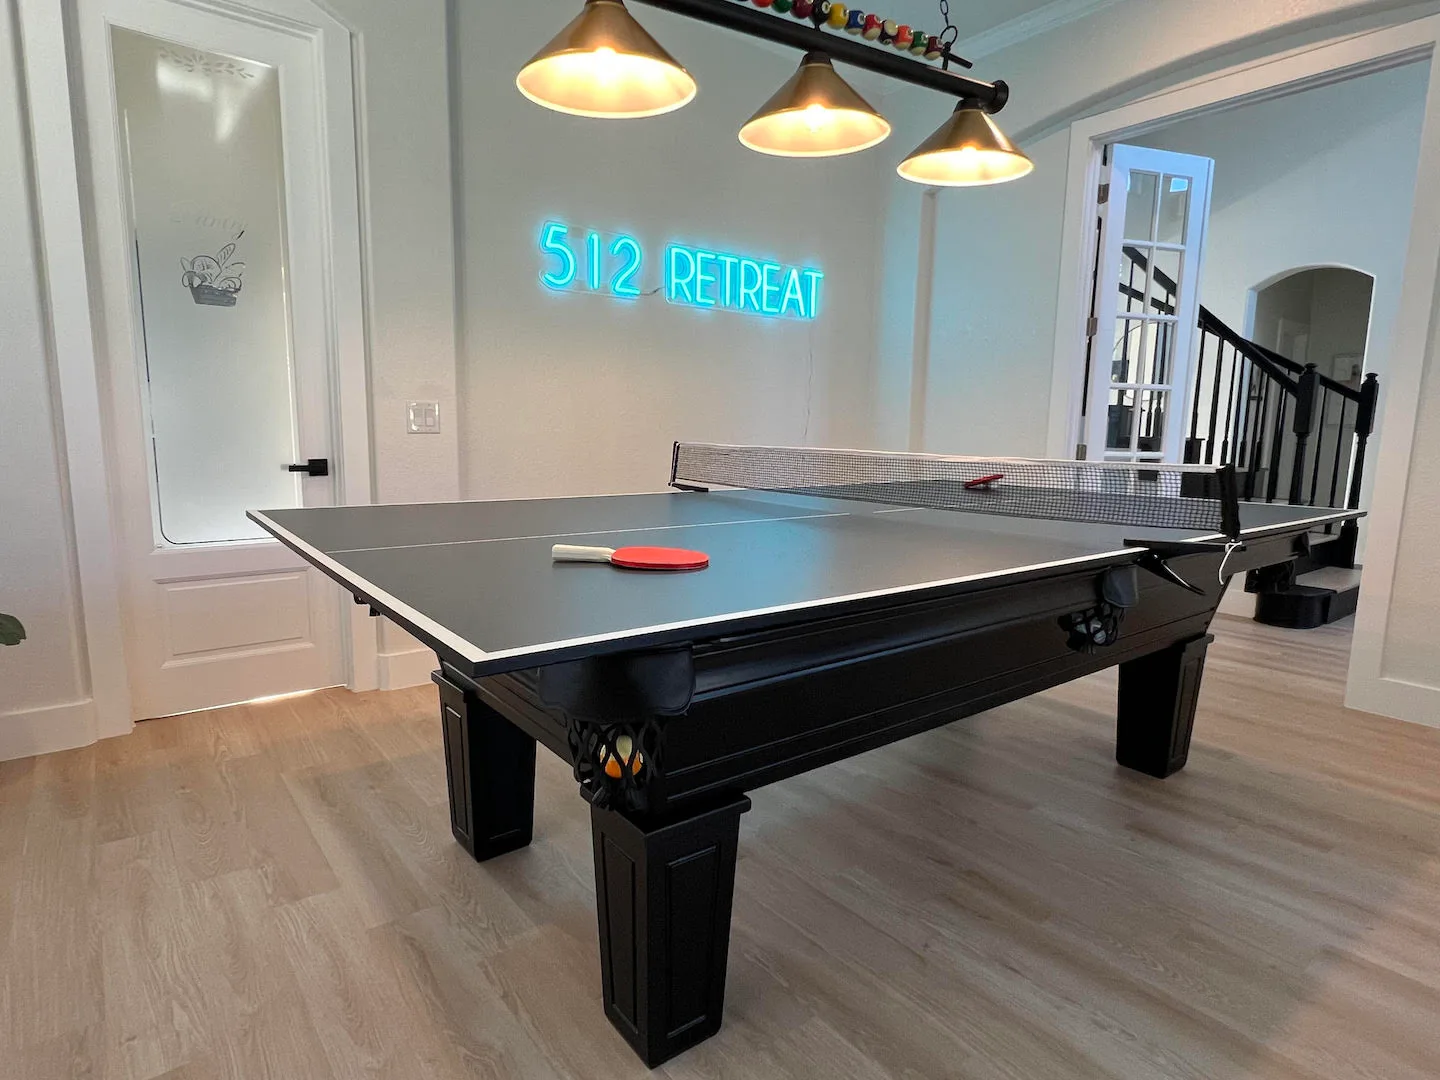 Custom pool table with a table tennis topper.
